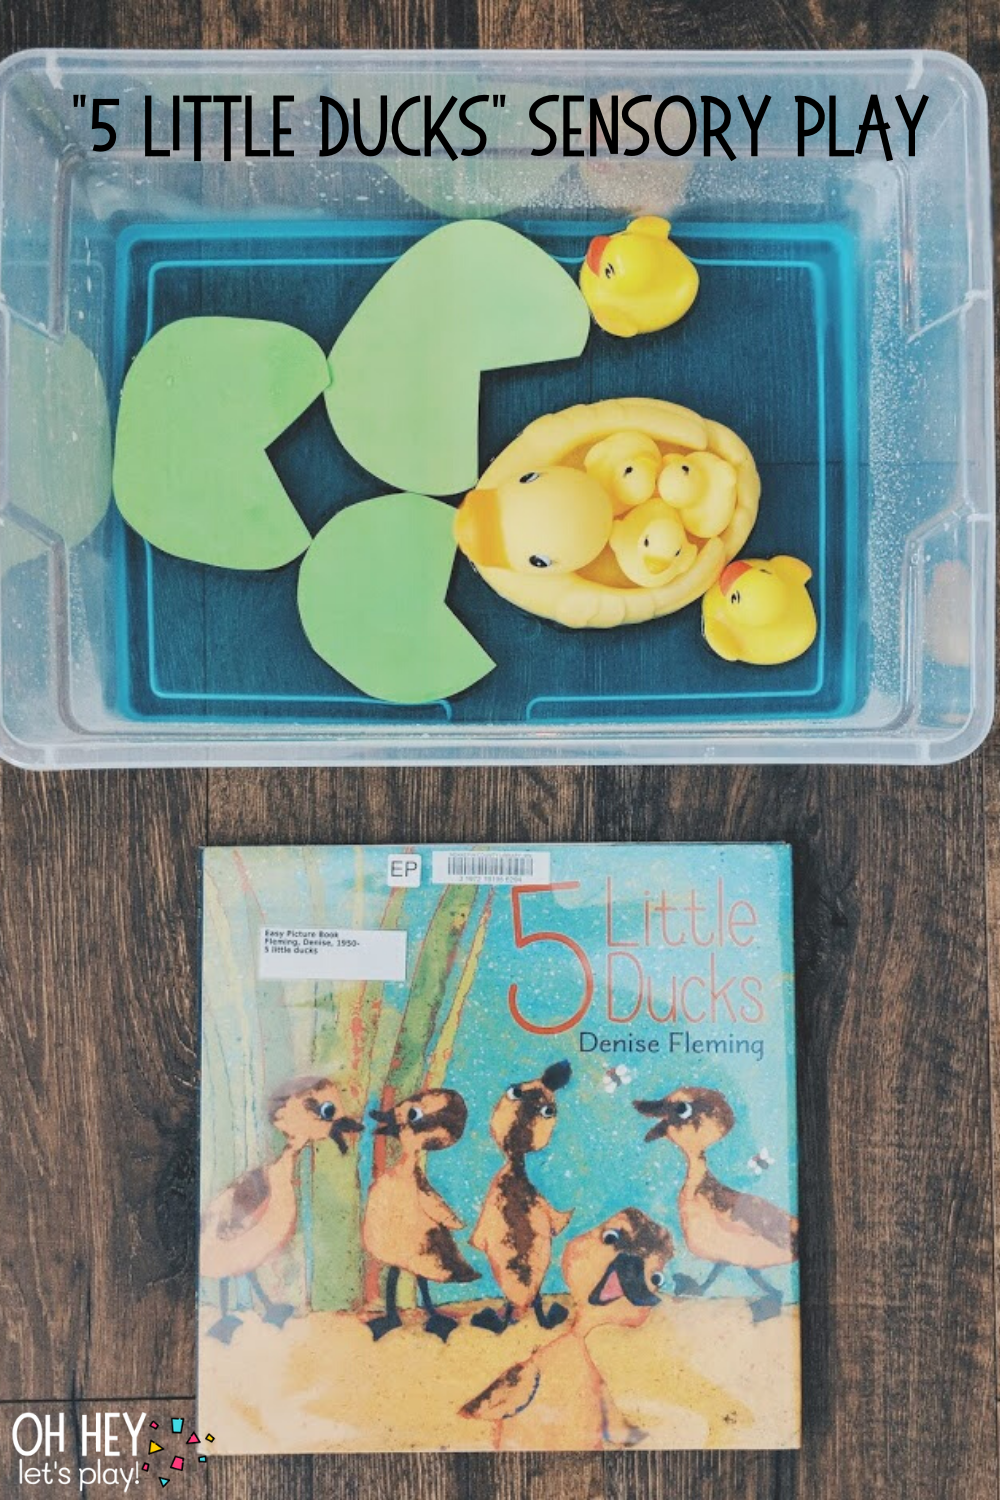 5 Little Ducks Sensory Play 30+ Activities for 1-2 Year Old Toddlers - Oh Hey Let's Play www.ohheyletsplay.com.png